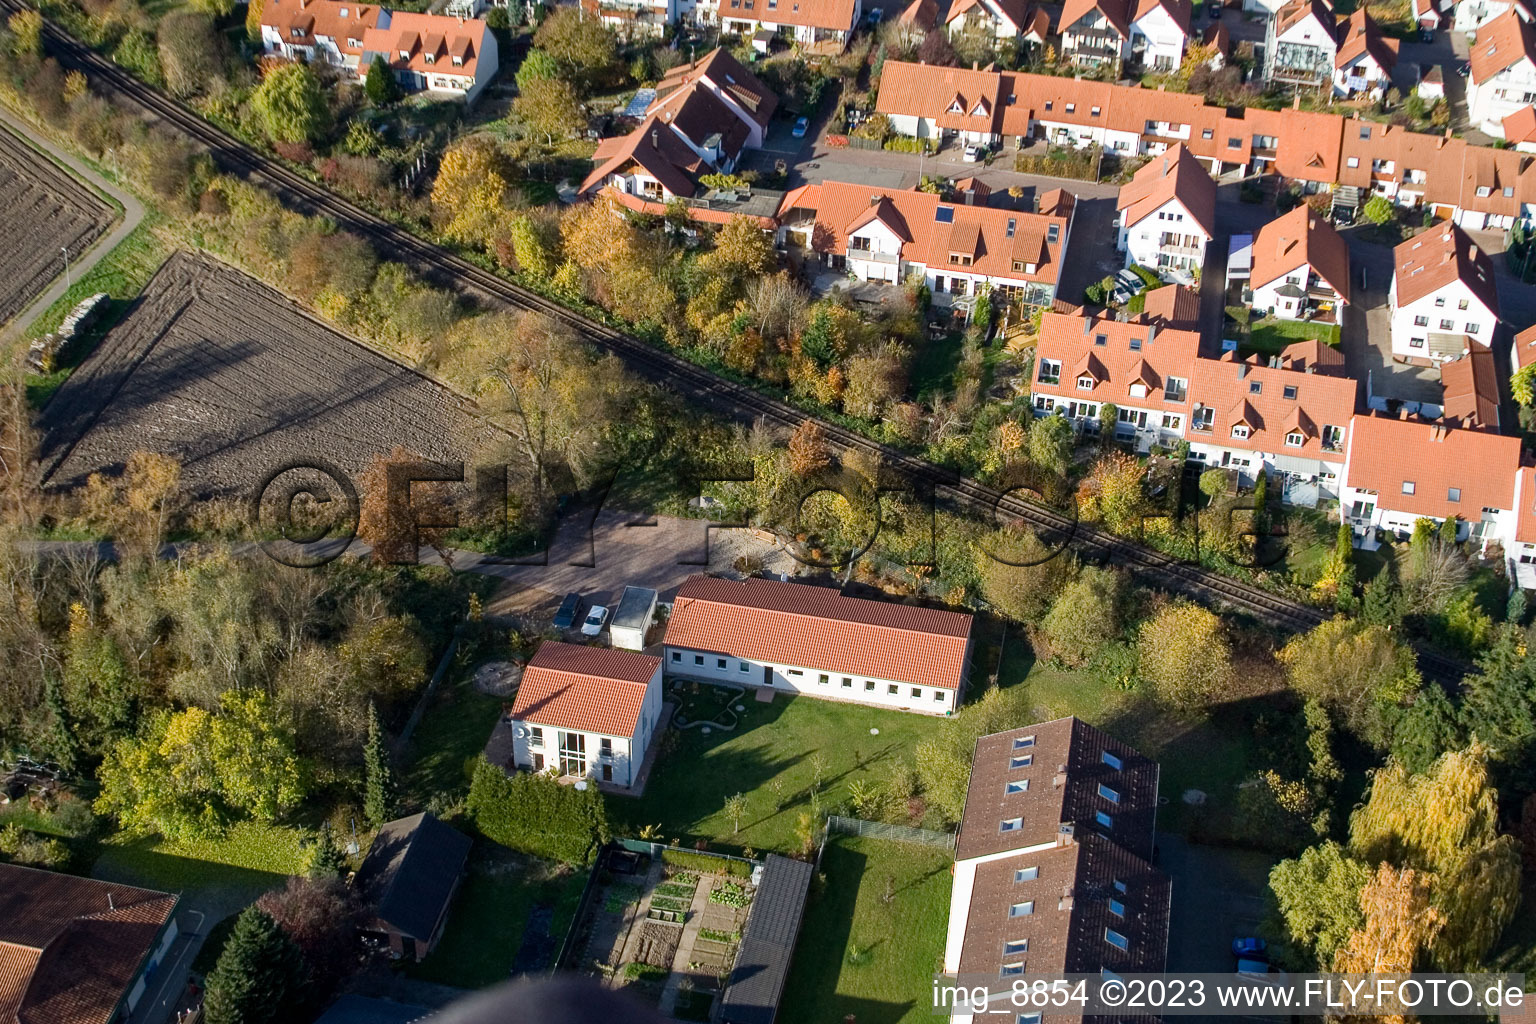 Aerial view of Veterinary practice in Kandel in the state Rhineland-Palatinate, Germany